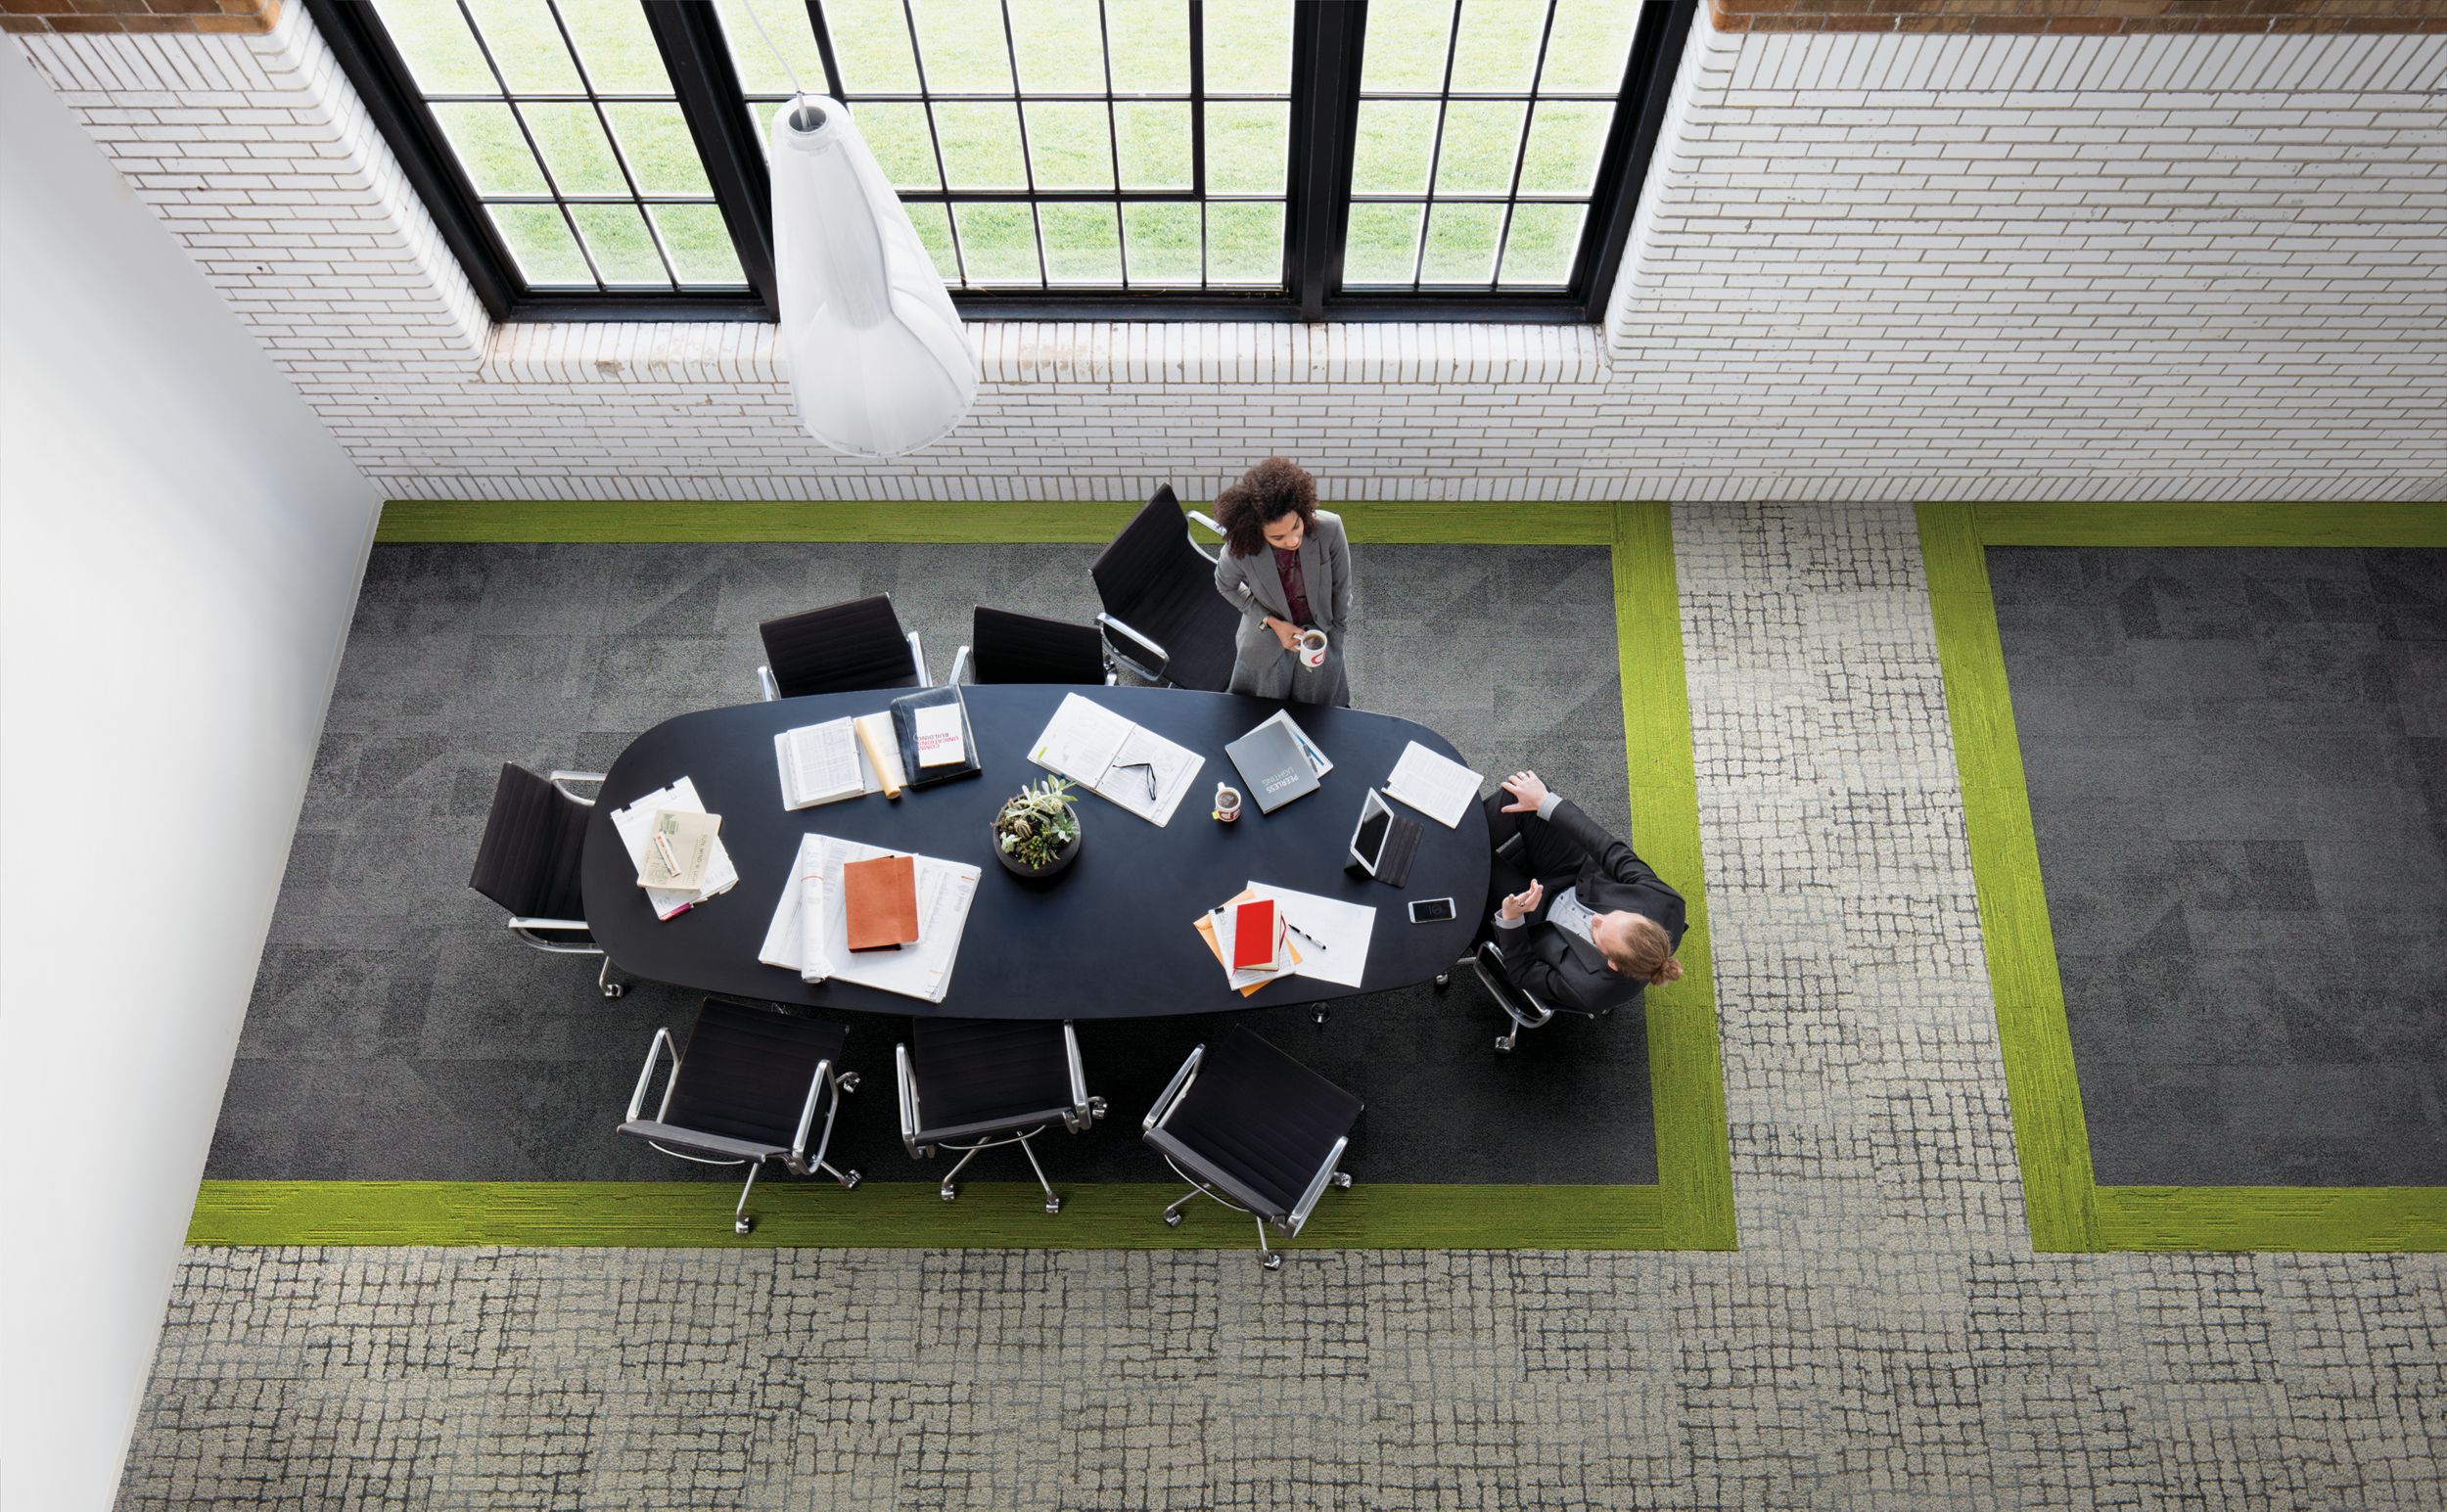 Interface Paver and Sett in Stone carpet tile with UR501 plank carpet tile in overhead view of meeting area with man and women conversating Bildnummer 3